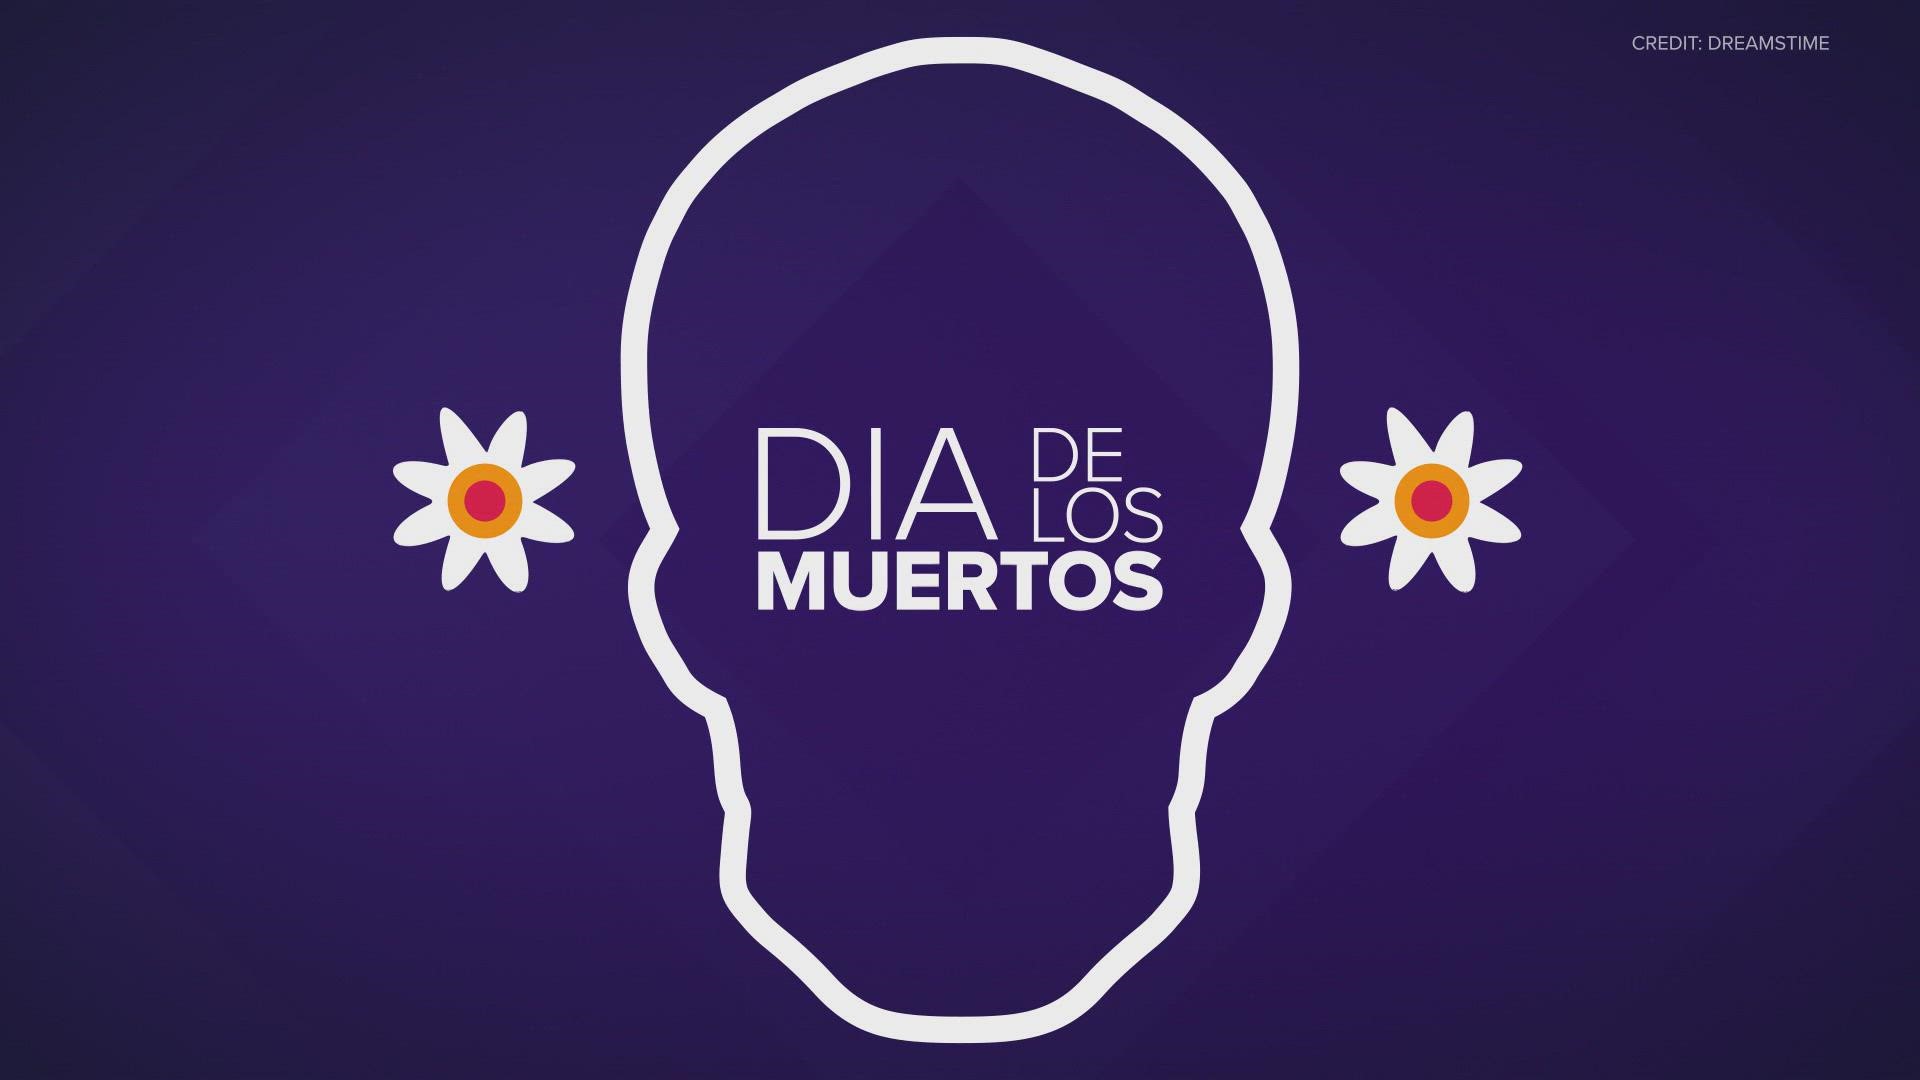 Here's what to know about Día de Muertos.